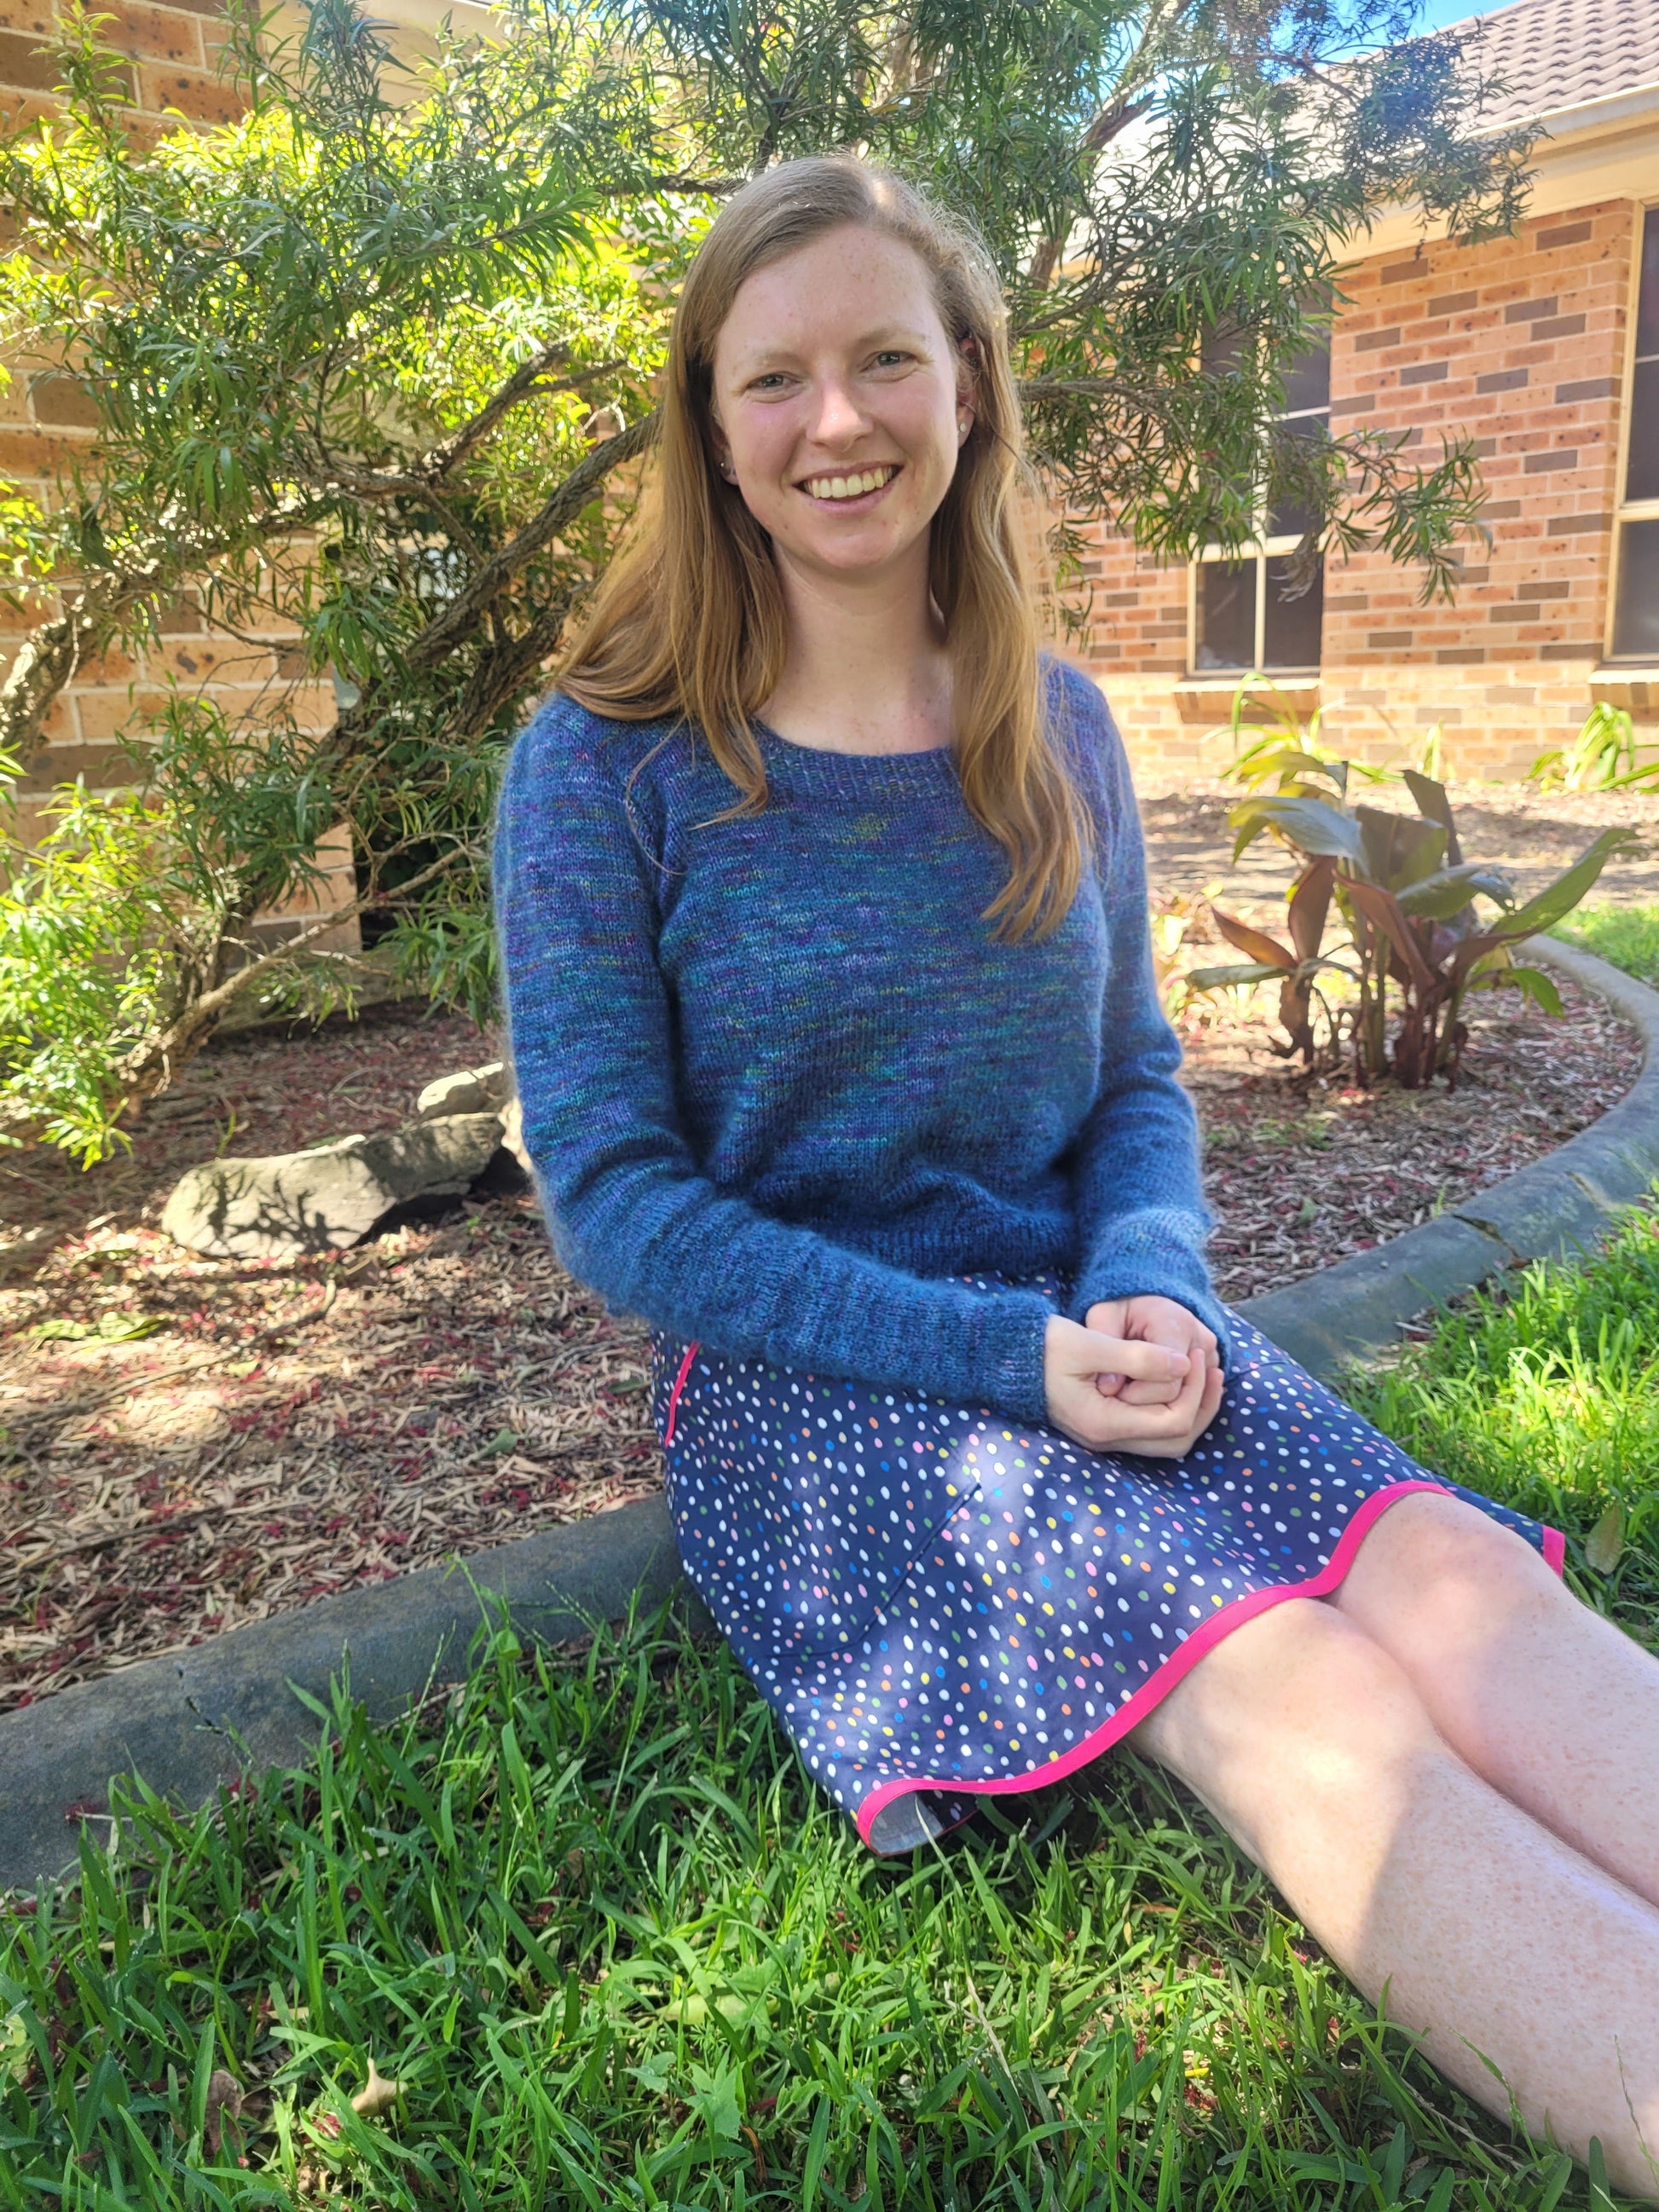 Ellen sits outside near a garden, smiling at the camera. She wears a blue skirt with a hand knit sweater. The sweater is made with blue yarn, and has sleeves that are gathered at the top seams.